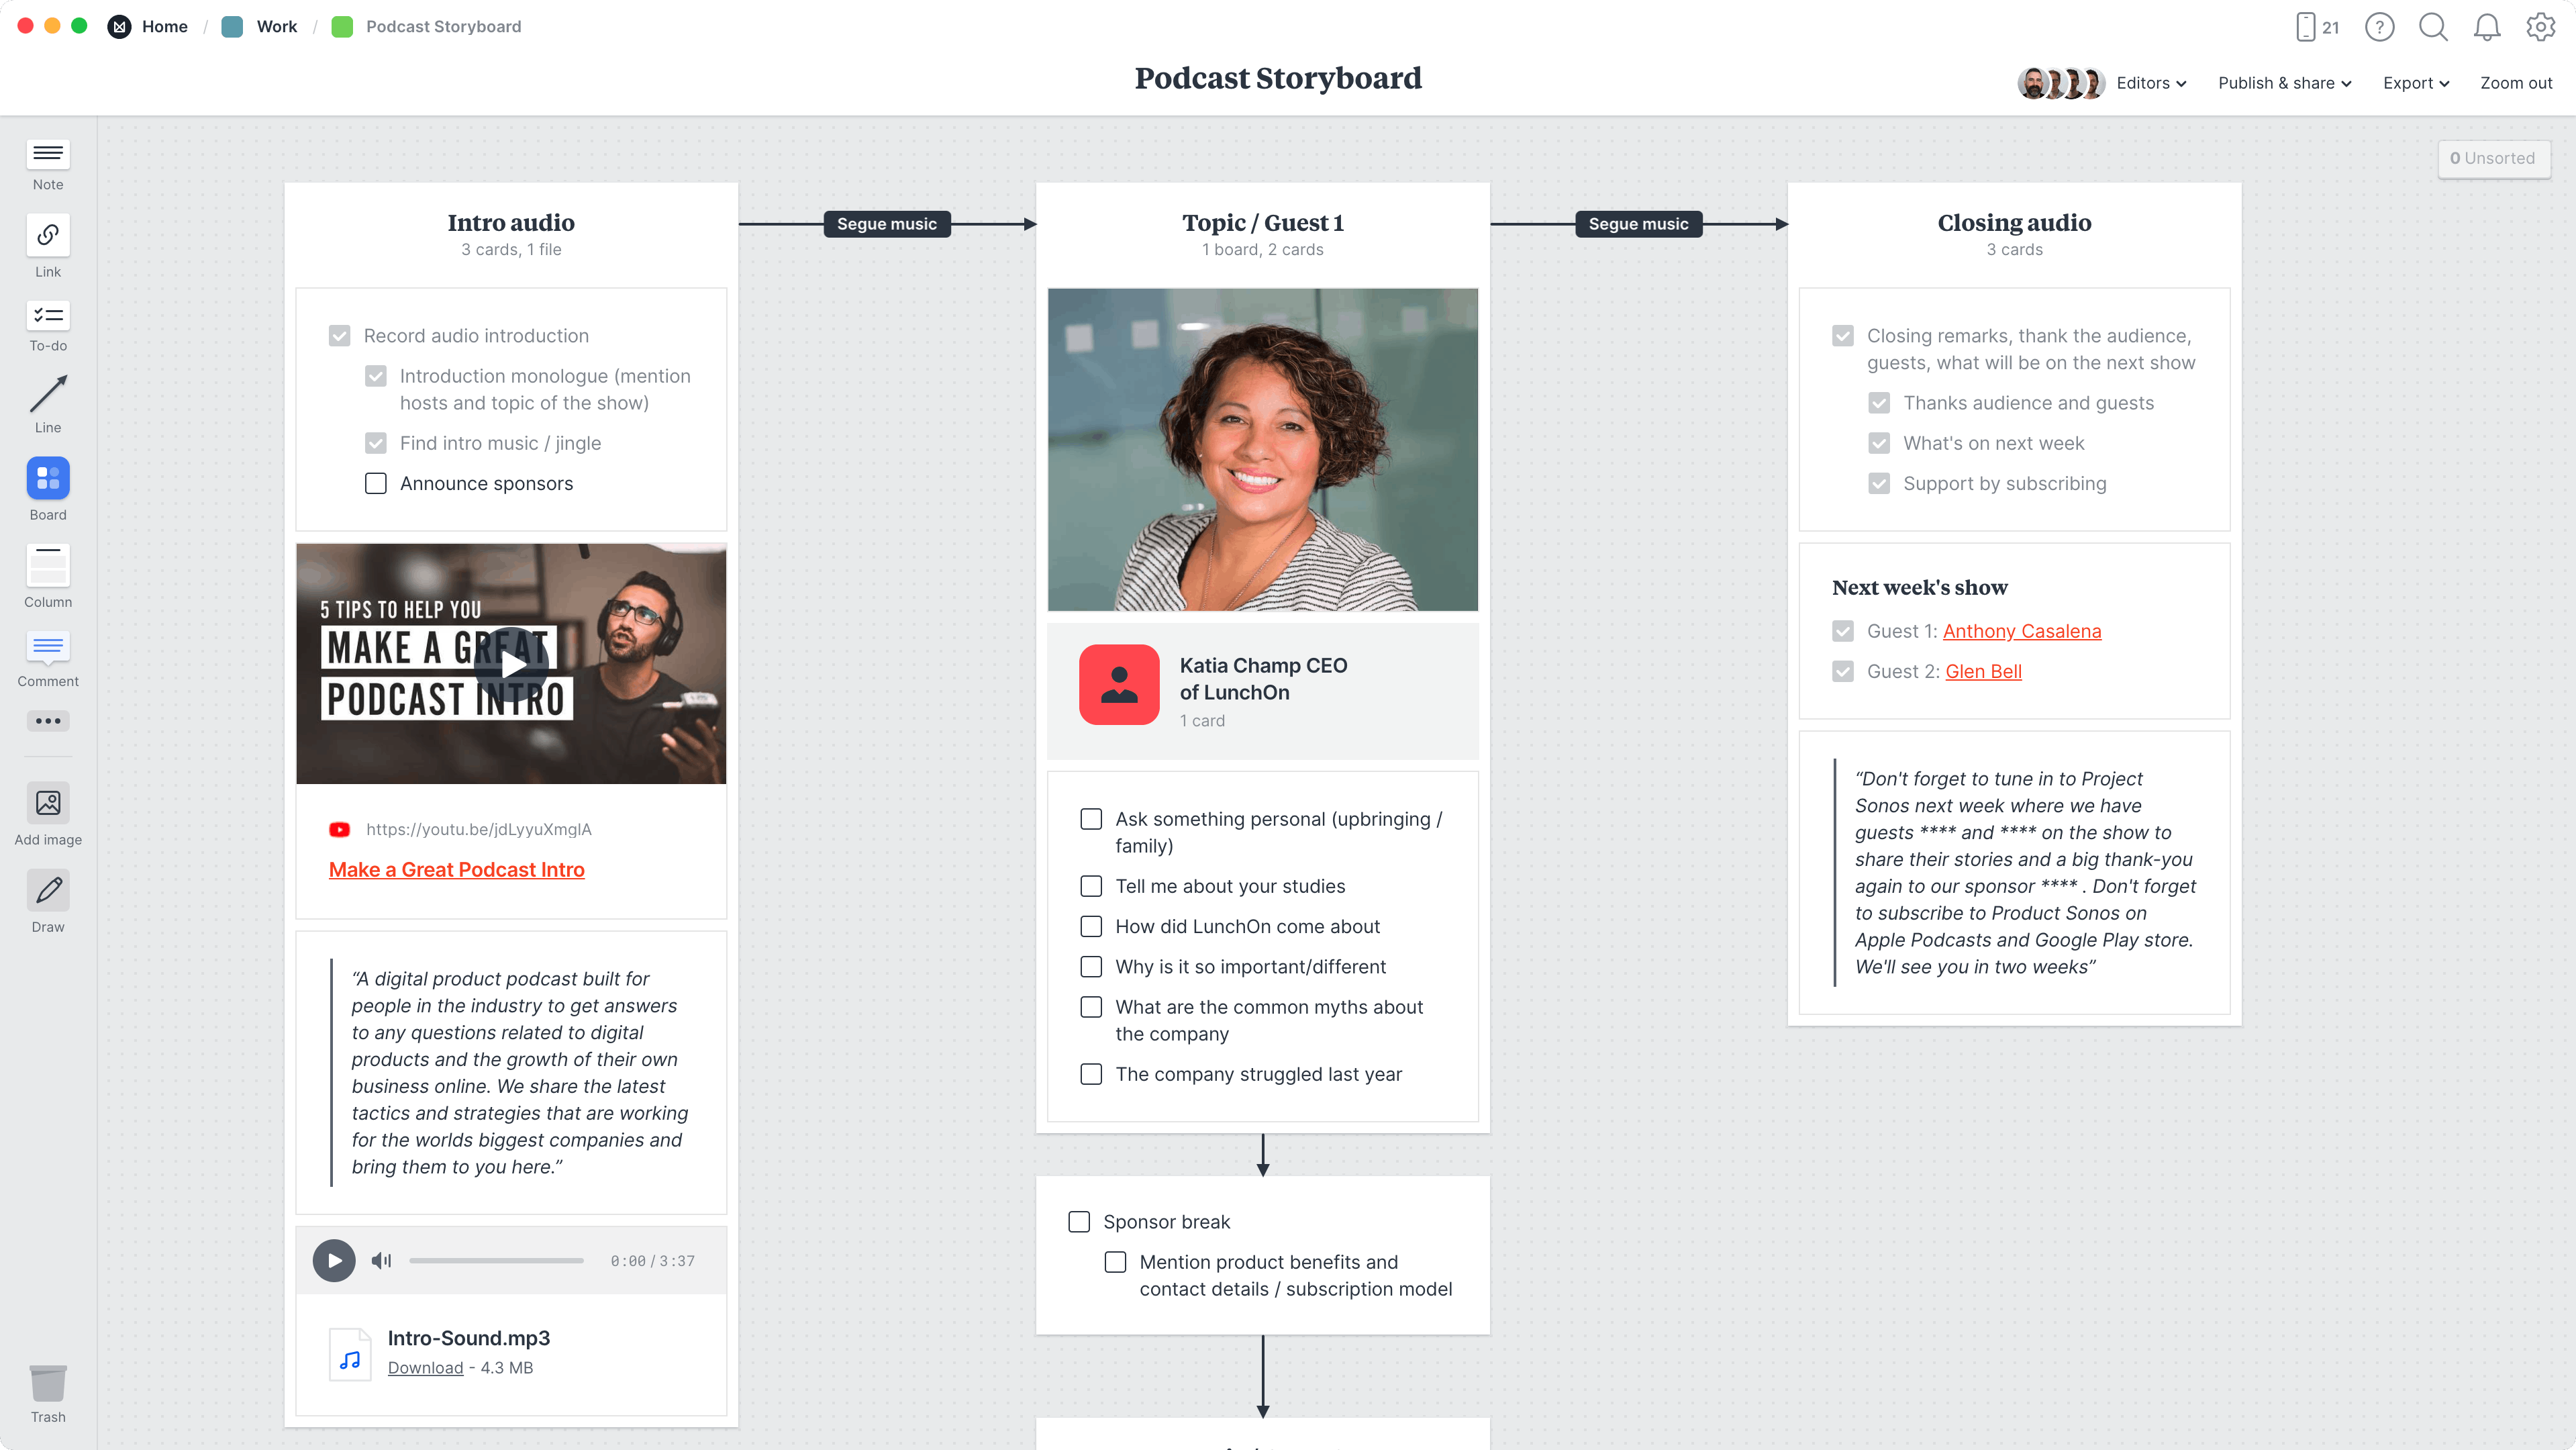 Podcast Storyboard Template, within the Milanote app